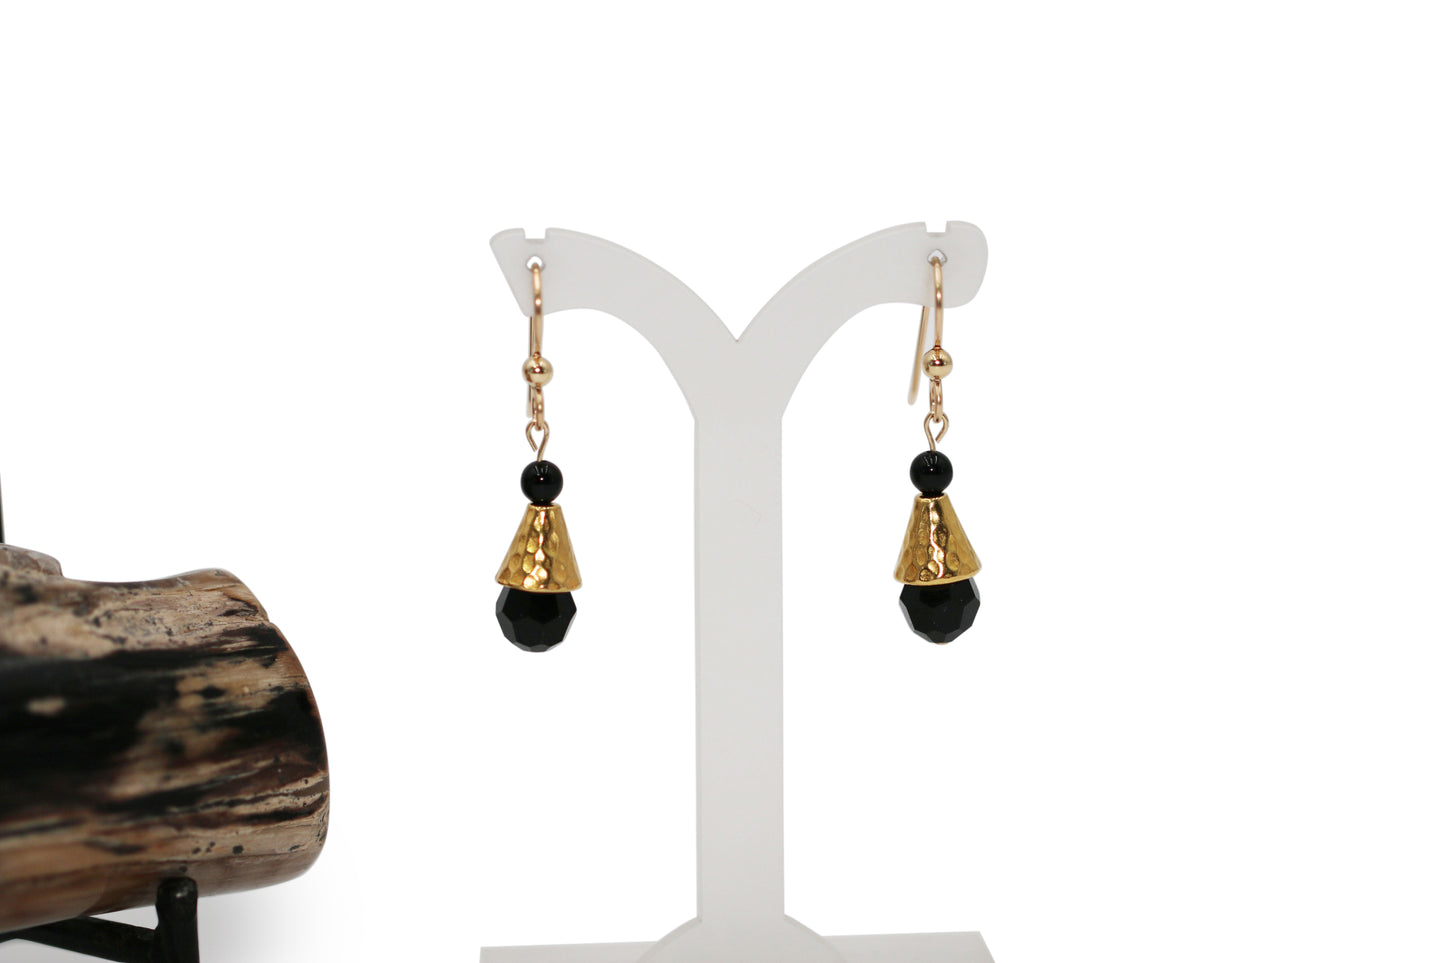 Jet Black Austrian Crystals with Cones and Black Obsidian Natural Gemstones Gold Filled Fishhook Earrings - Annabel's Jewelry & Leather